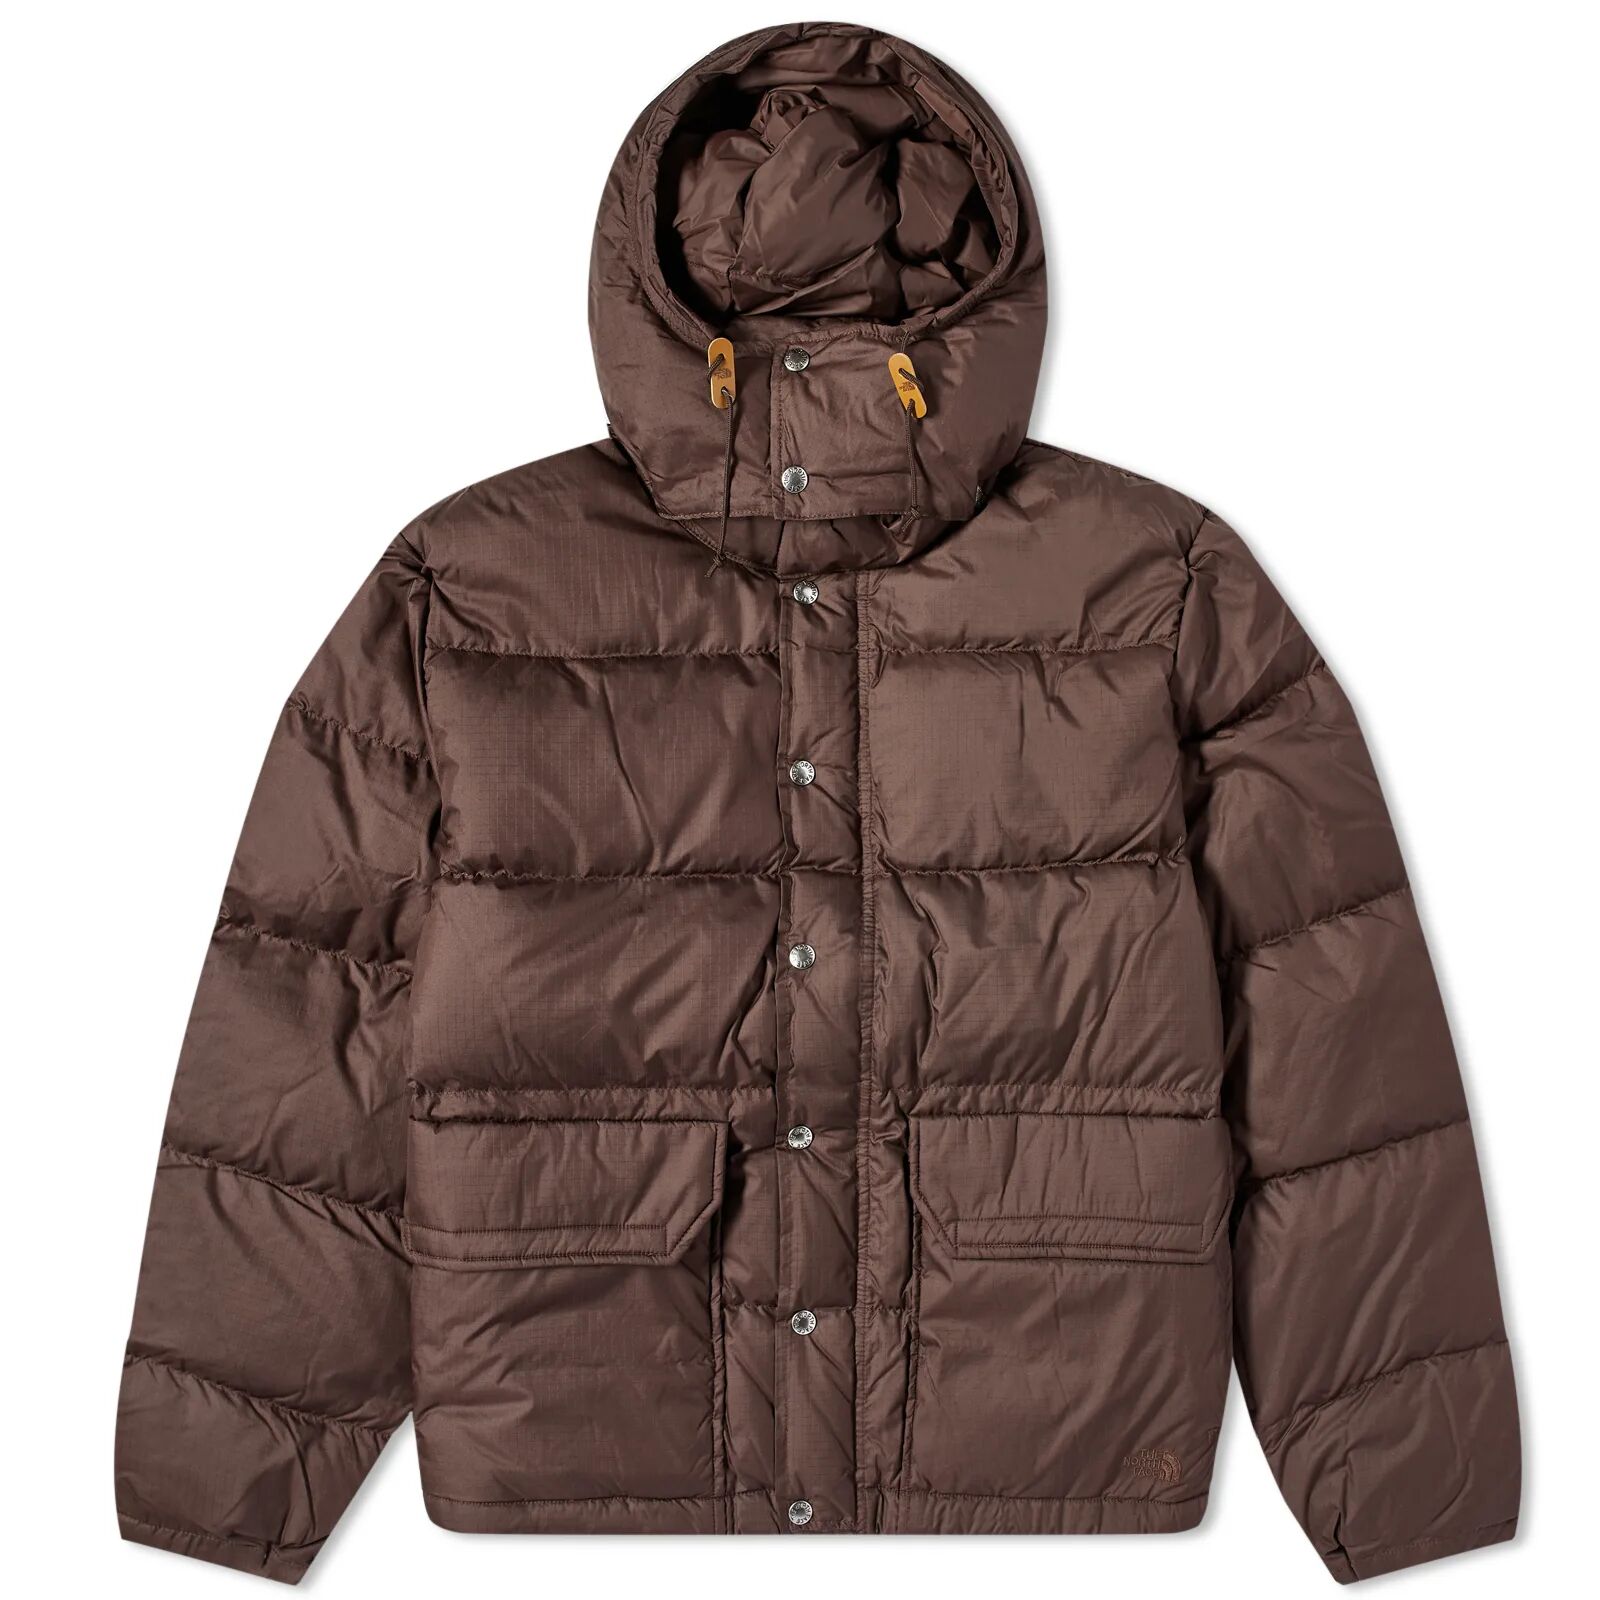 The North Face Men's Heritage '71 Sierra Down Shorts Jacket in Coal Brown, Size Medium